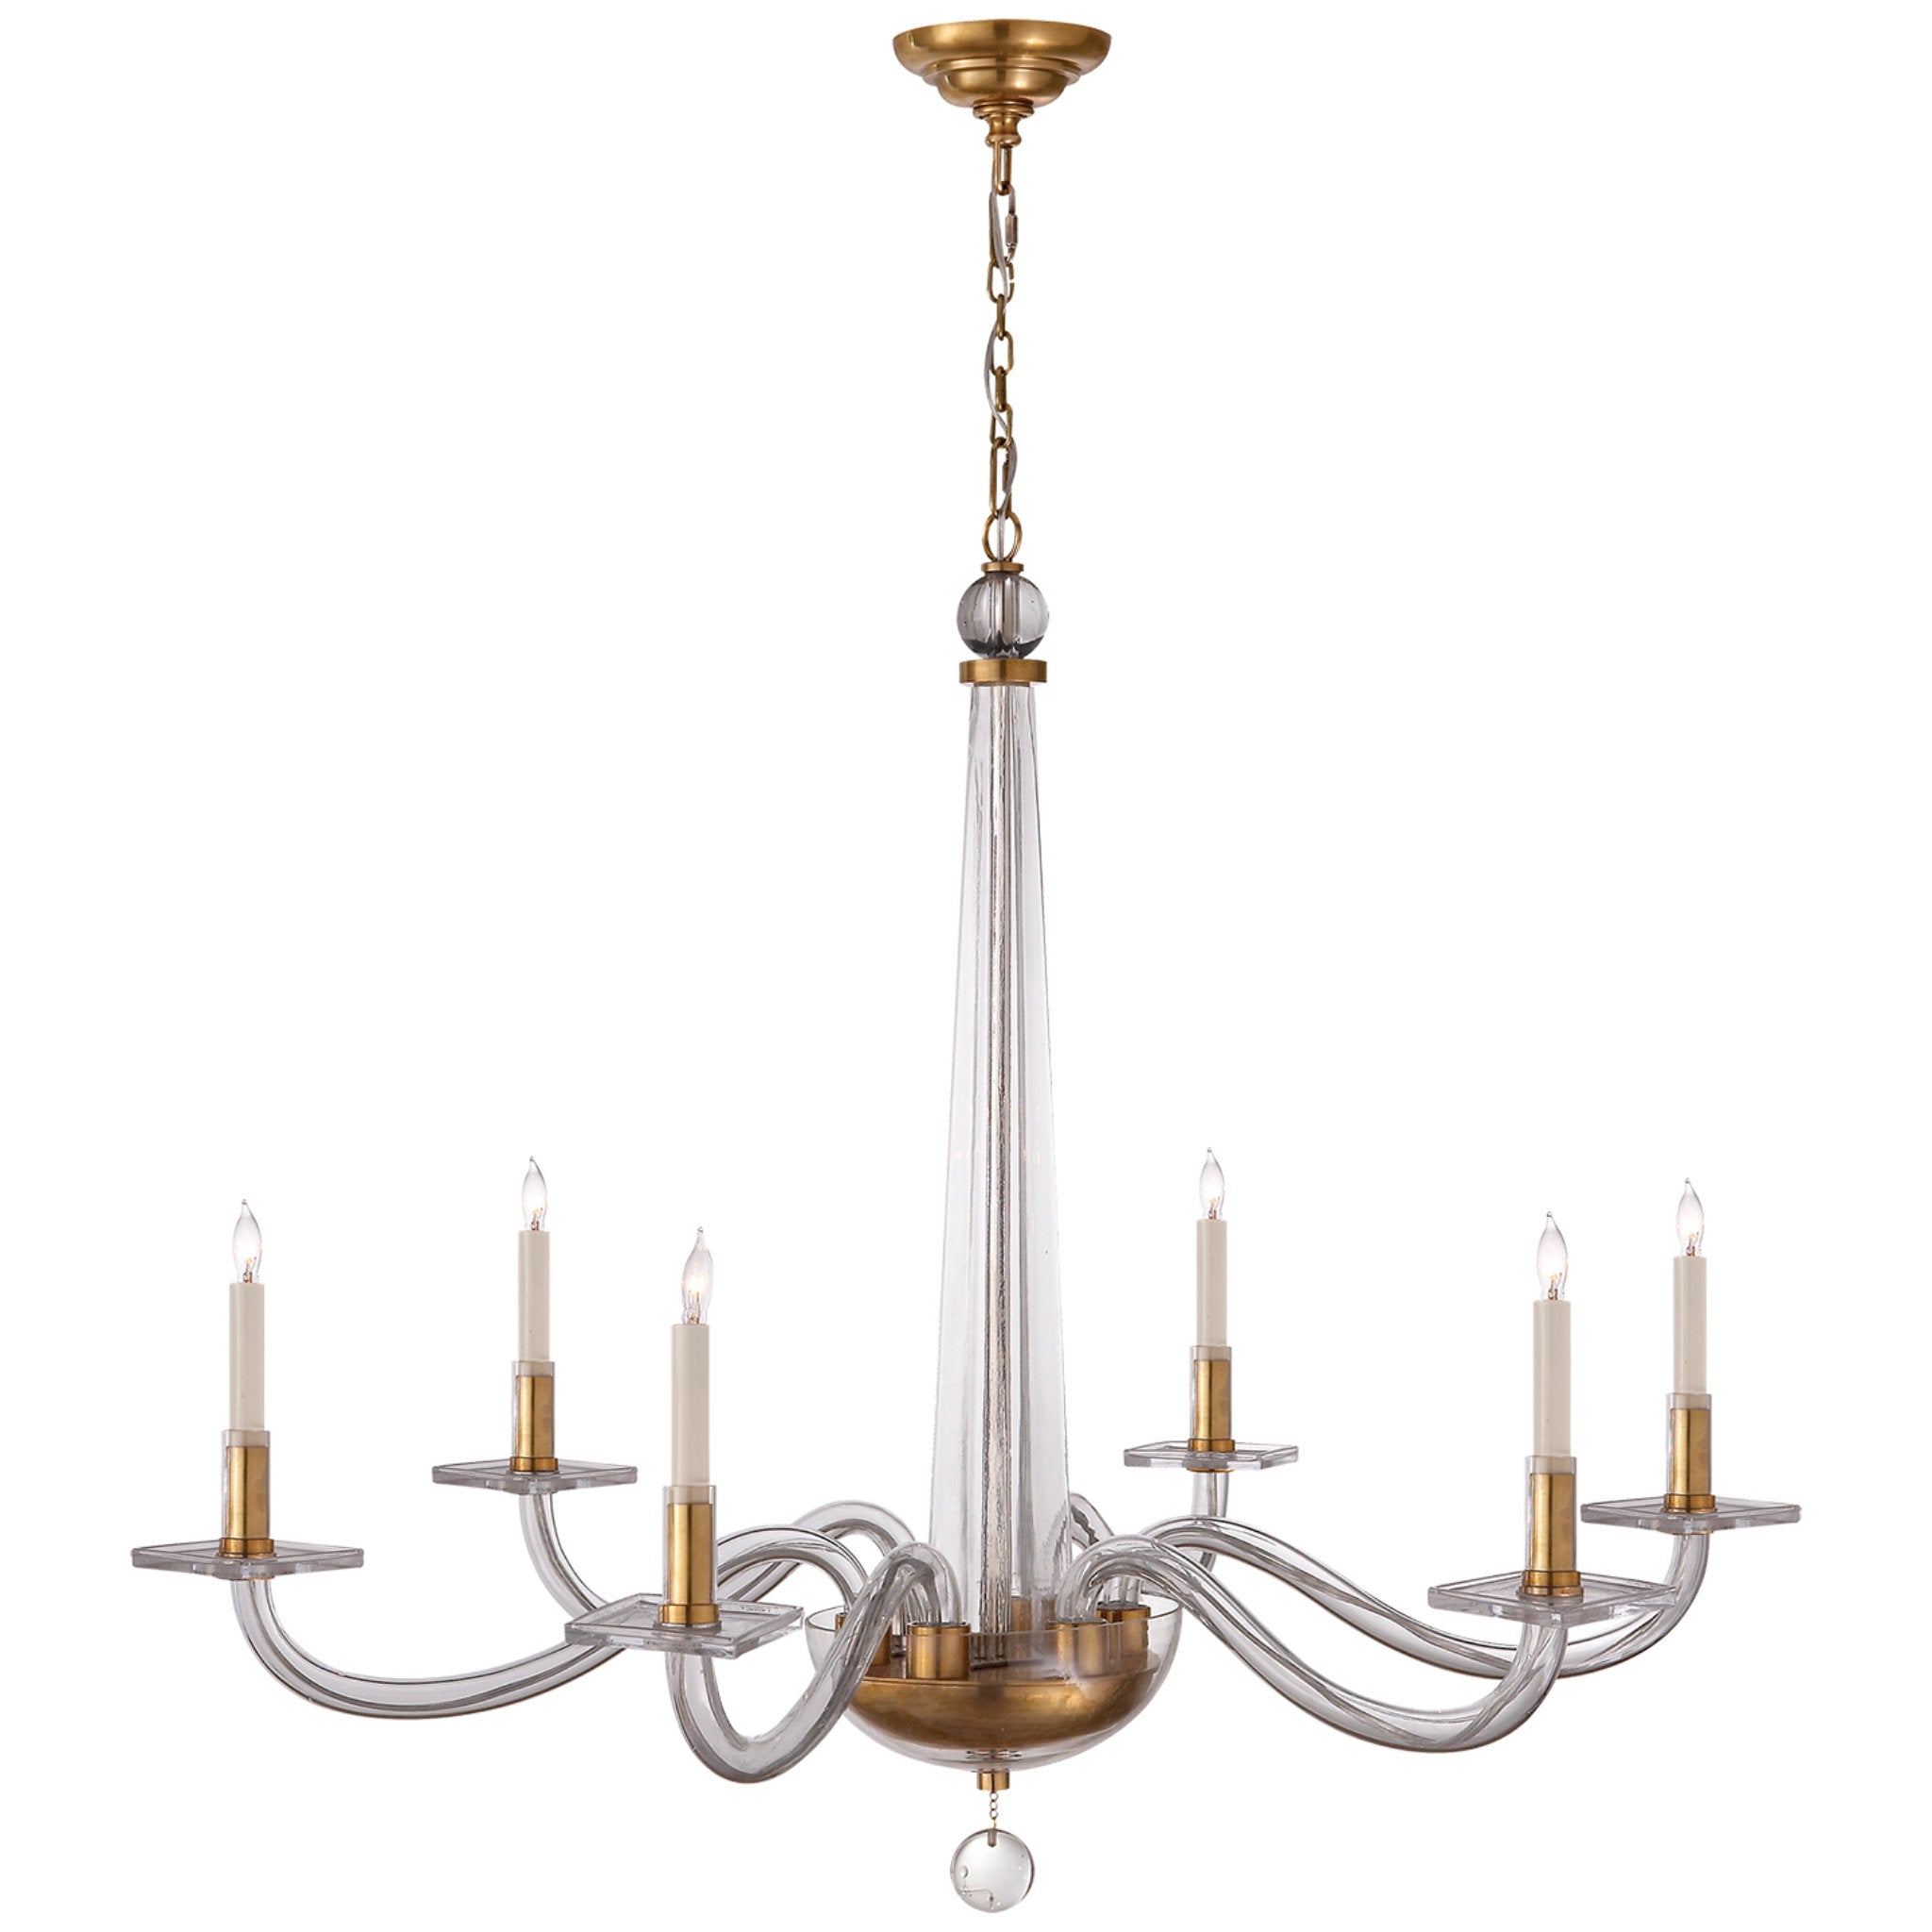 Chapman & Myers Bernardo Large Chandelier Antique-Burnished Brass and Clear Glass